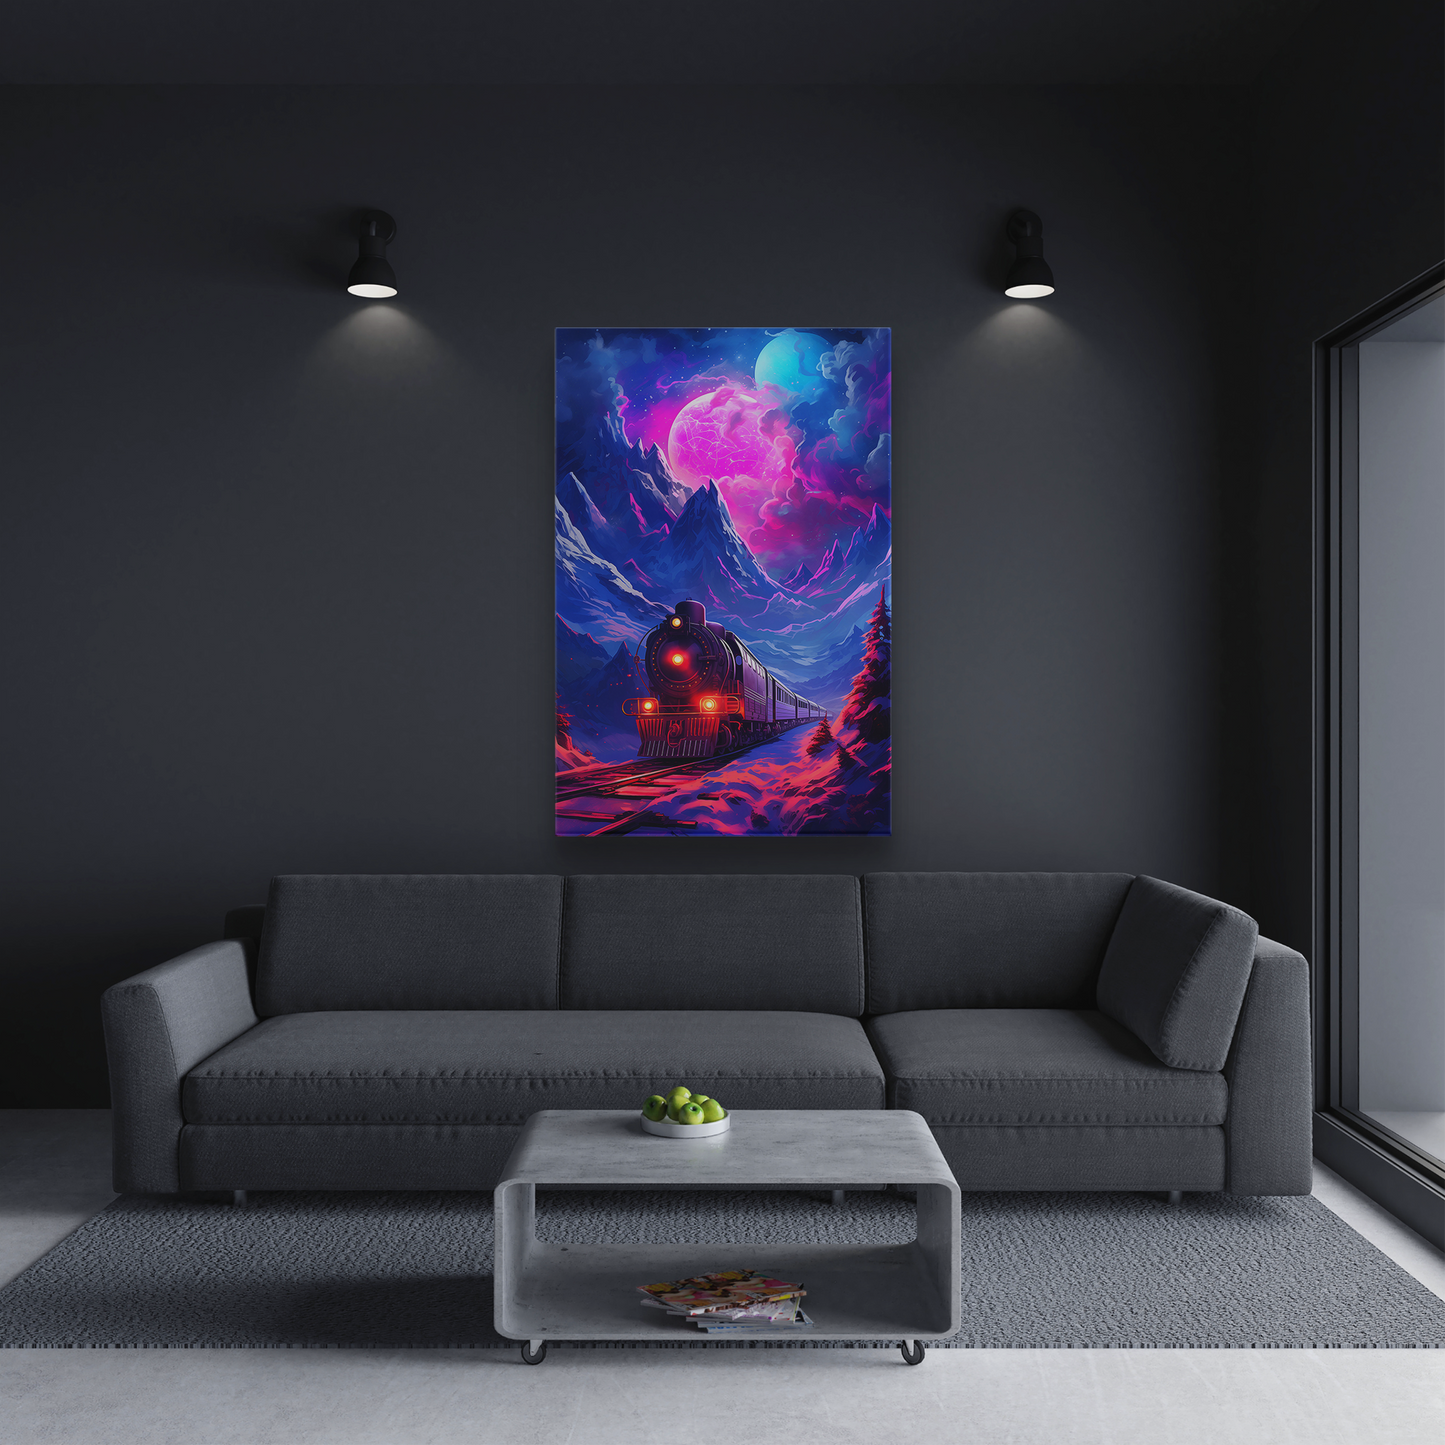 Polar Express Luminescence (Canvas)Polar Express Luminescence (Canvas  Matte finish, stretched, with a depth of 1.25 inches)
Struggling with low-quality canvases? Switch to RimaGallery! Our canvases aRimaGallery